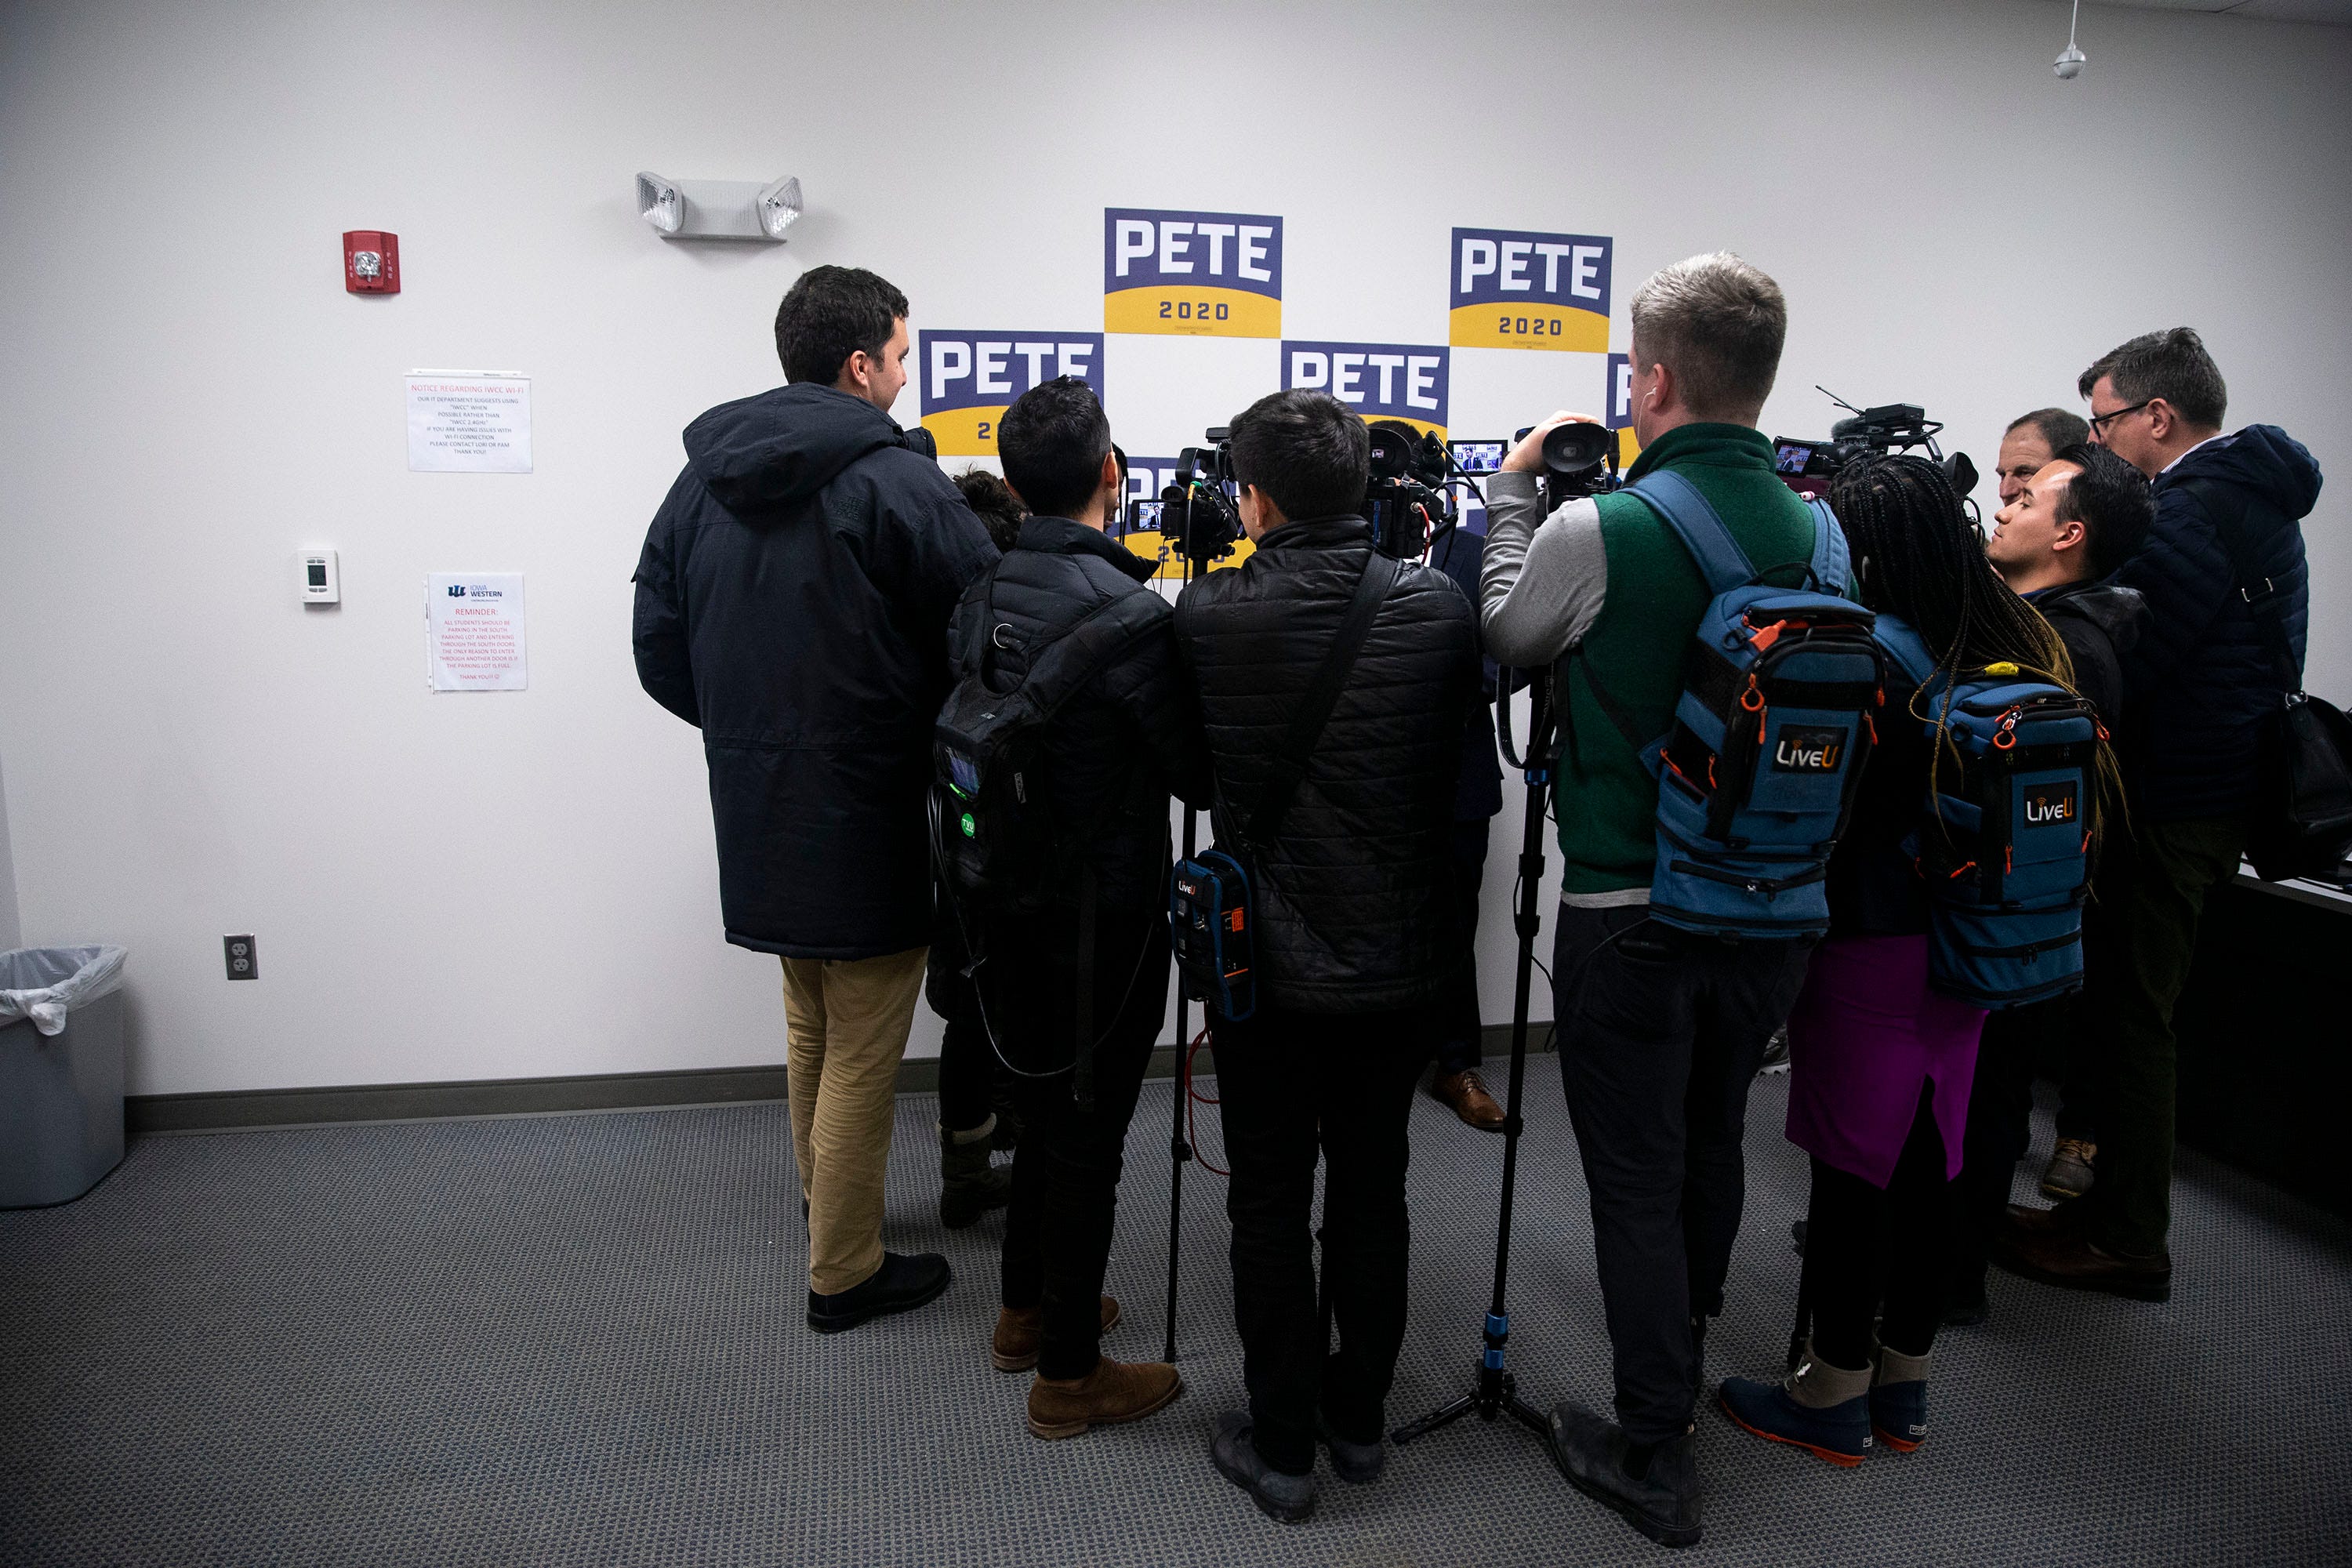 3:51 p.m., Harlan — Pete Buttigieg talks to the media after a town hall. He is asked about the latest back-and-forth between some of his rivals, but he declines to comment on it.